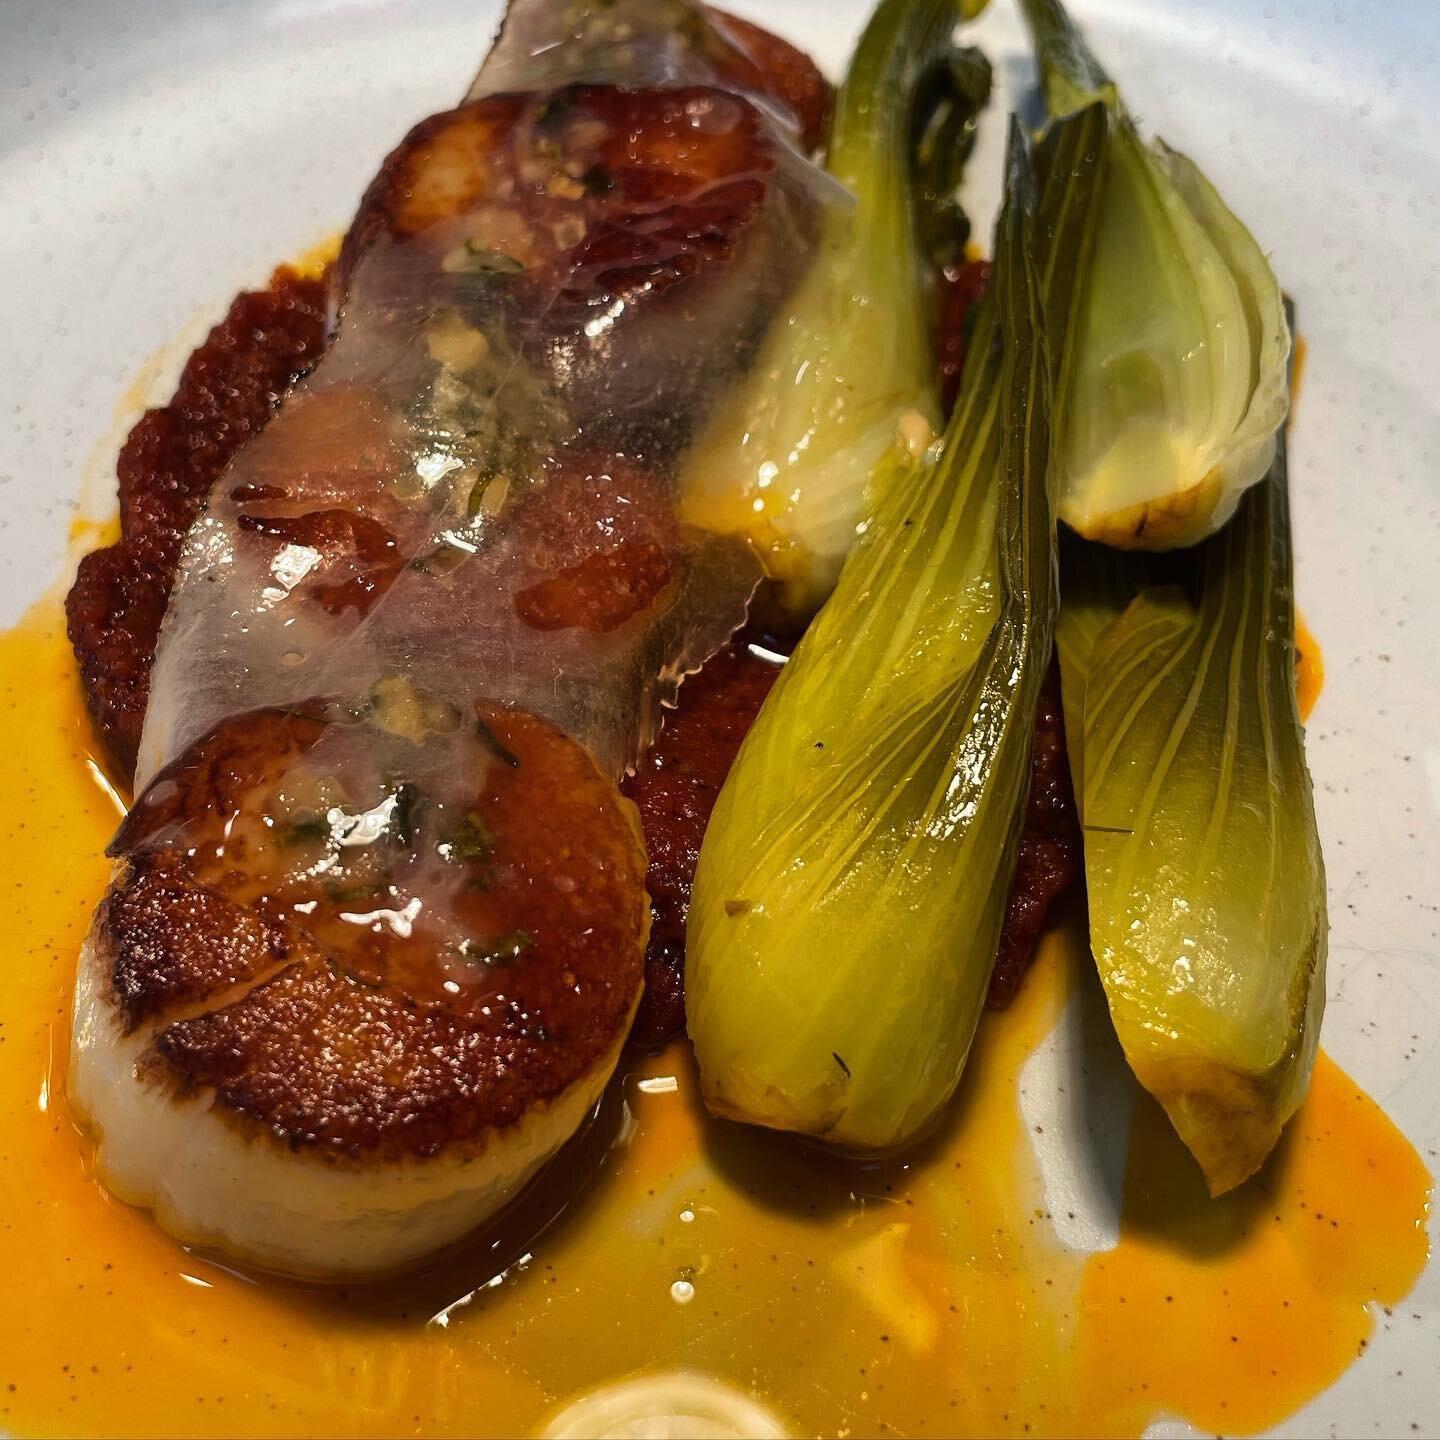 Why Hello, it&rsquo;s been a little while since we&rsquo;ve talked! Chef has been working on some new Spring dishes! Featured here is the Saut&eacute;ed Maine Scallops &ldquo;Gamberi&rdquo; Tomato Concasse, Saffron-Baby Fennel, Iberico Lardo. Look fo